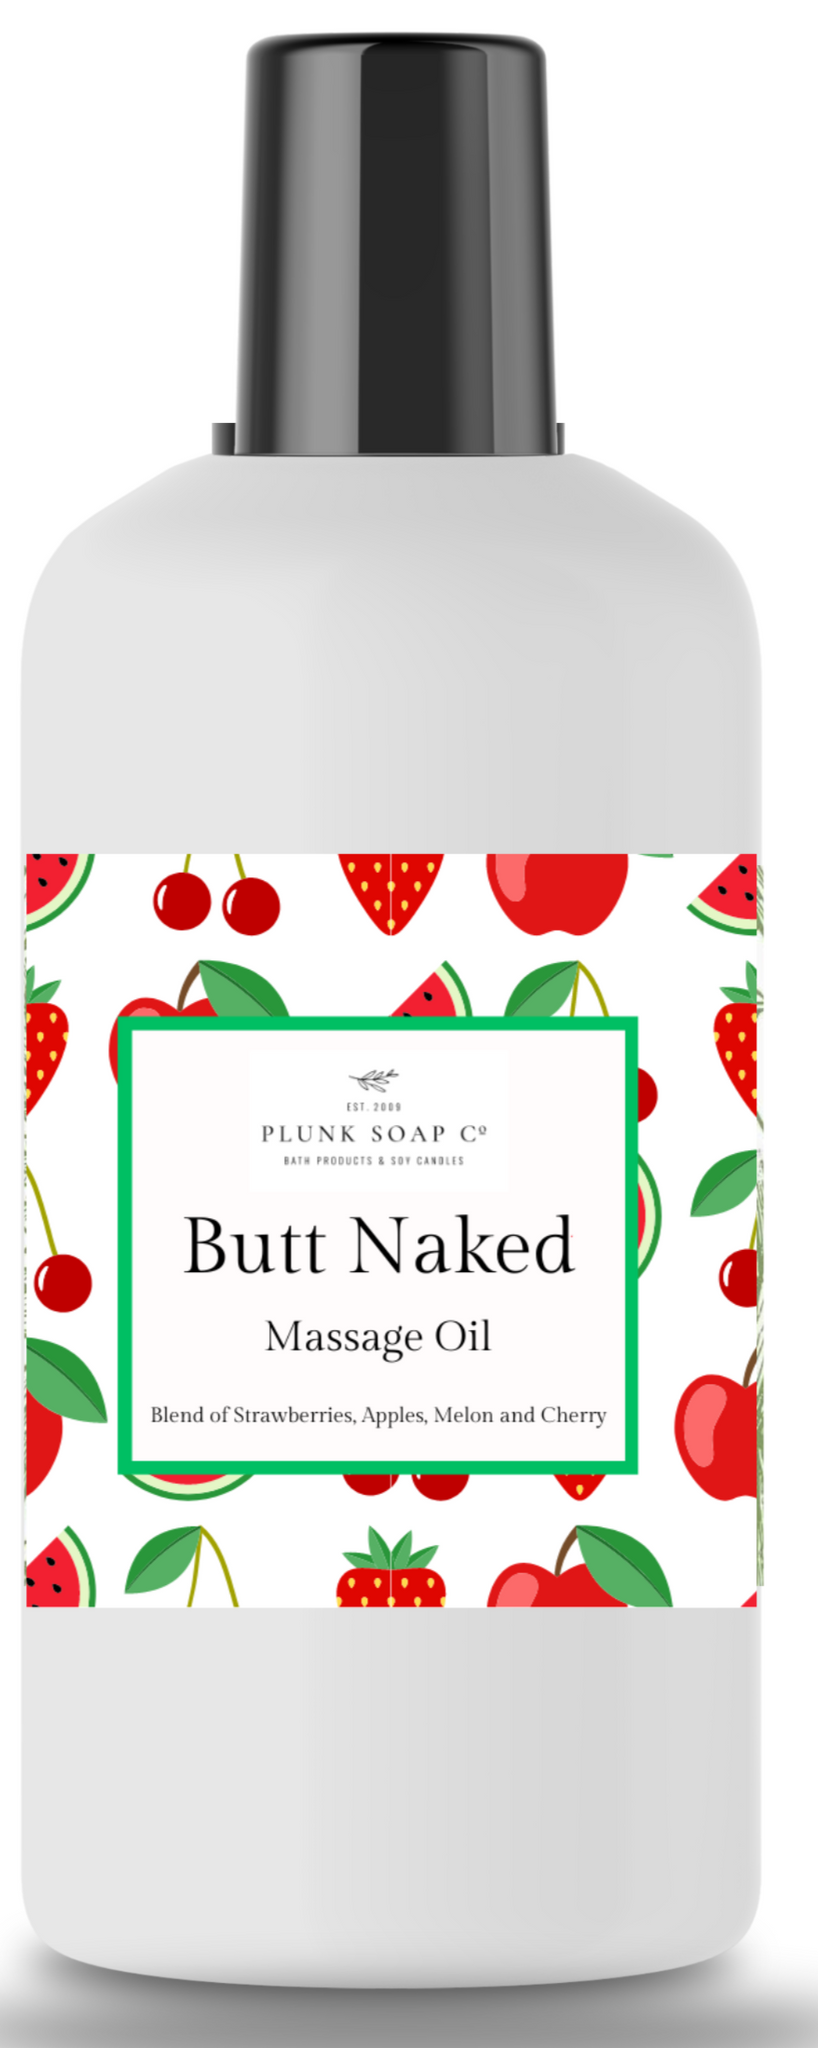 Butt Naked scented massage oil